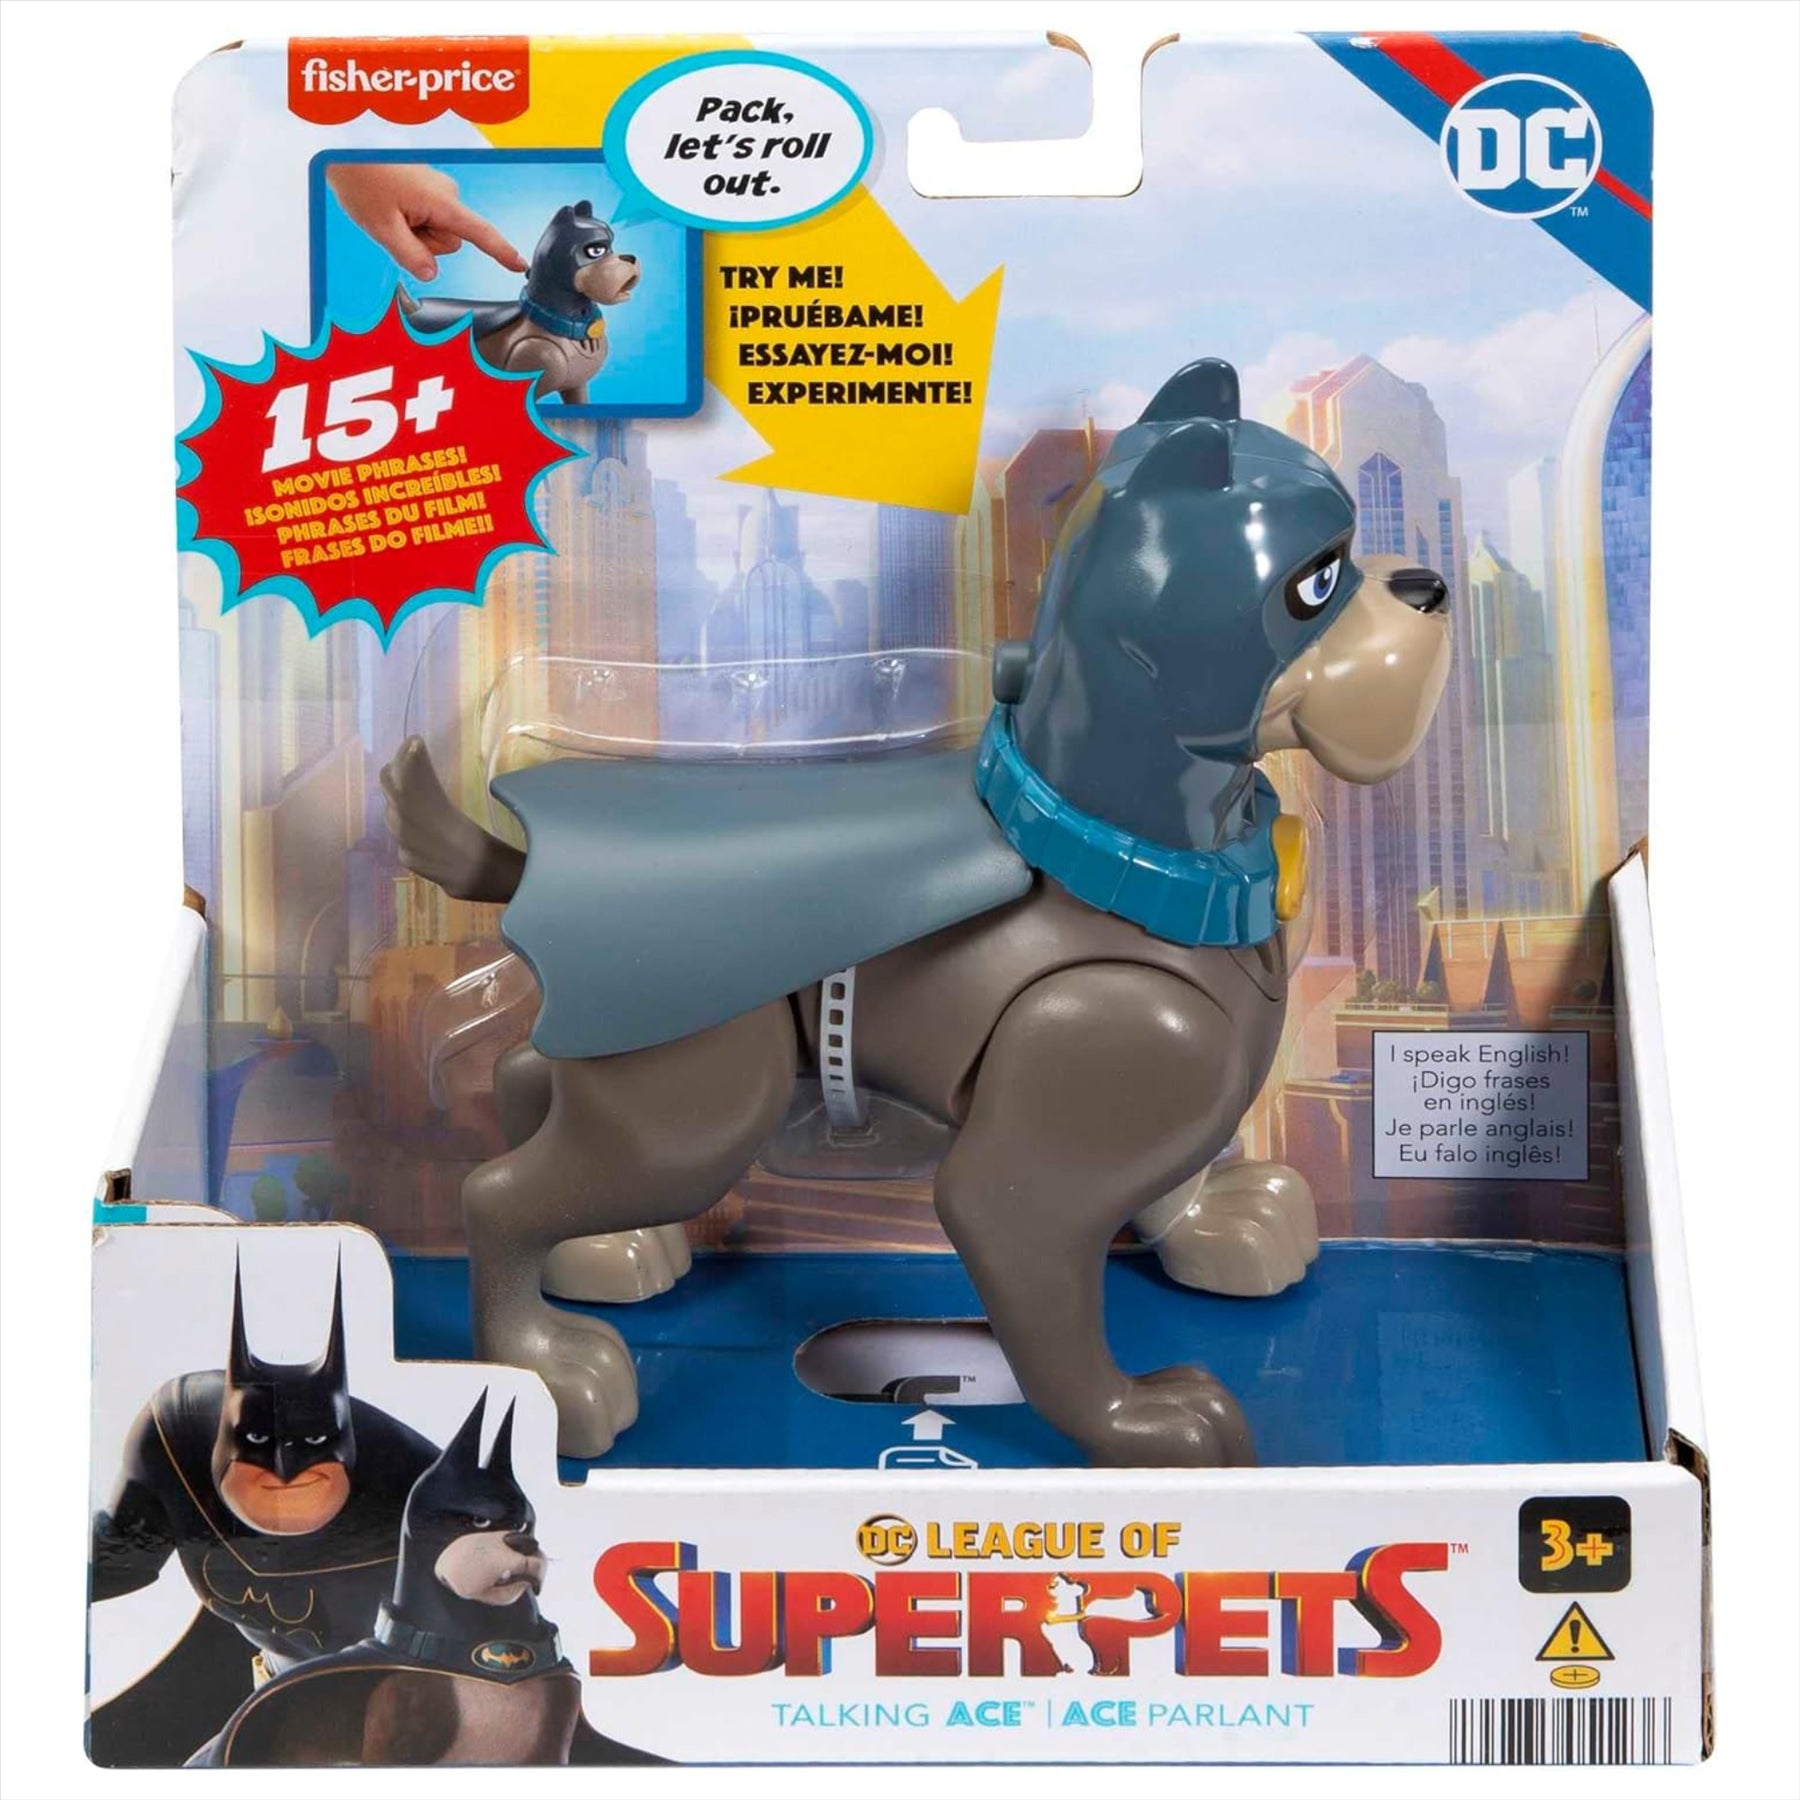 Fisher-Price Superpets Talking Ace Toy Batman's Dog Action Figure with Sounds